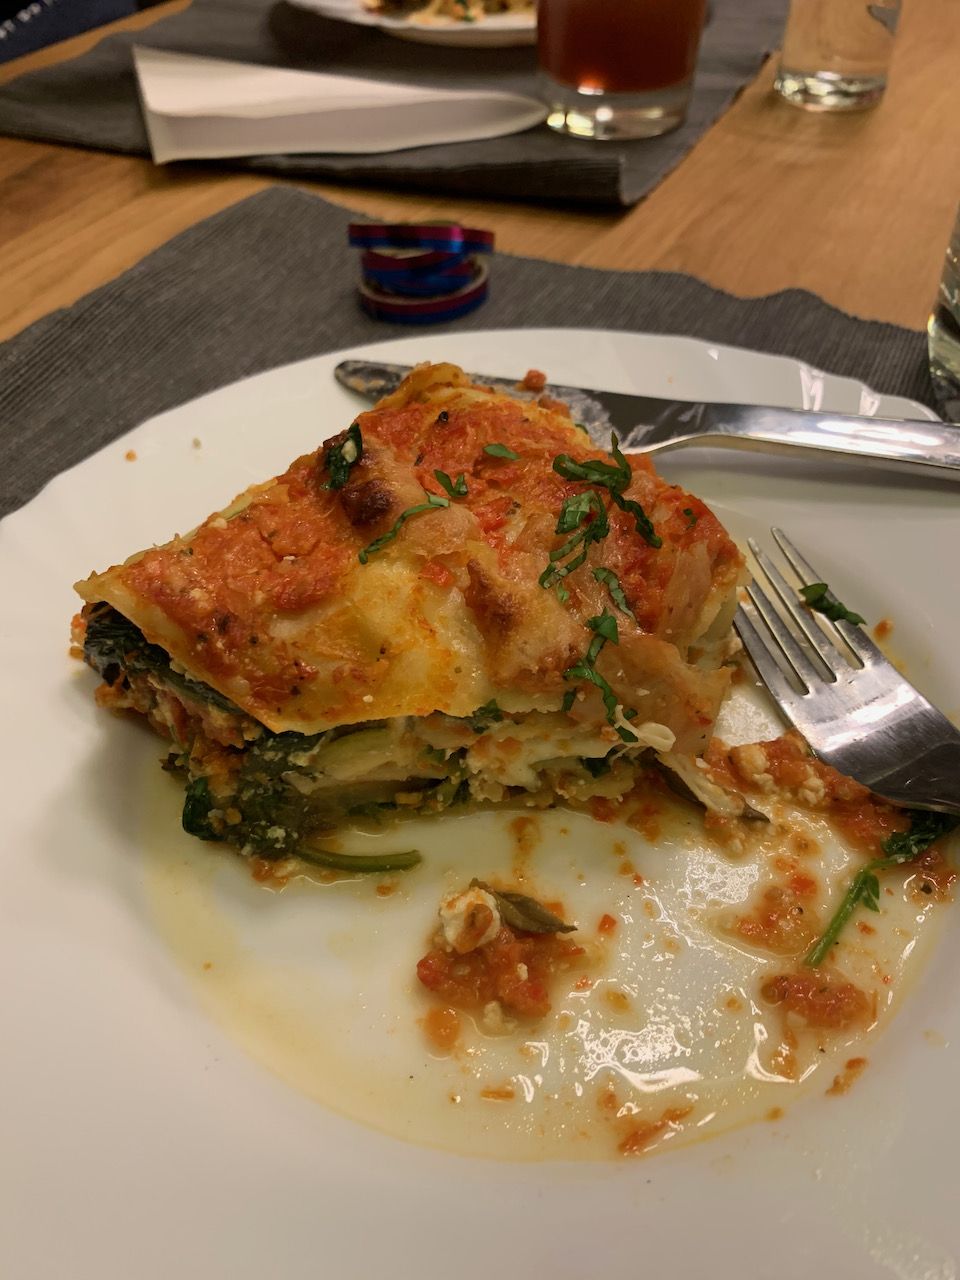 A slice of the baked lasagna